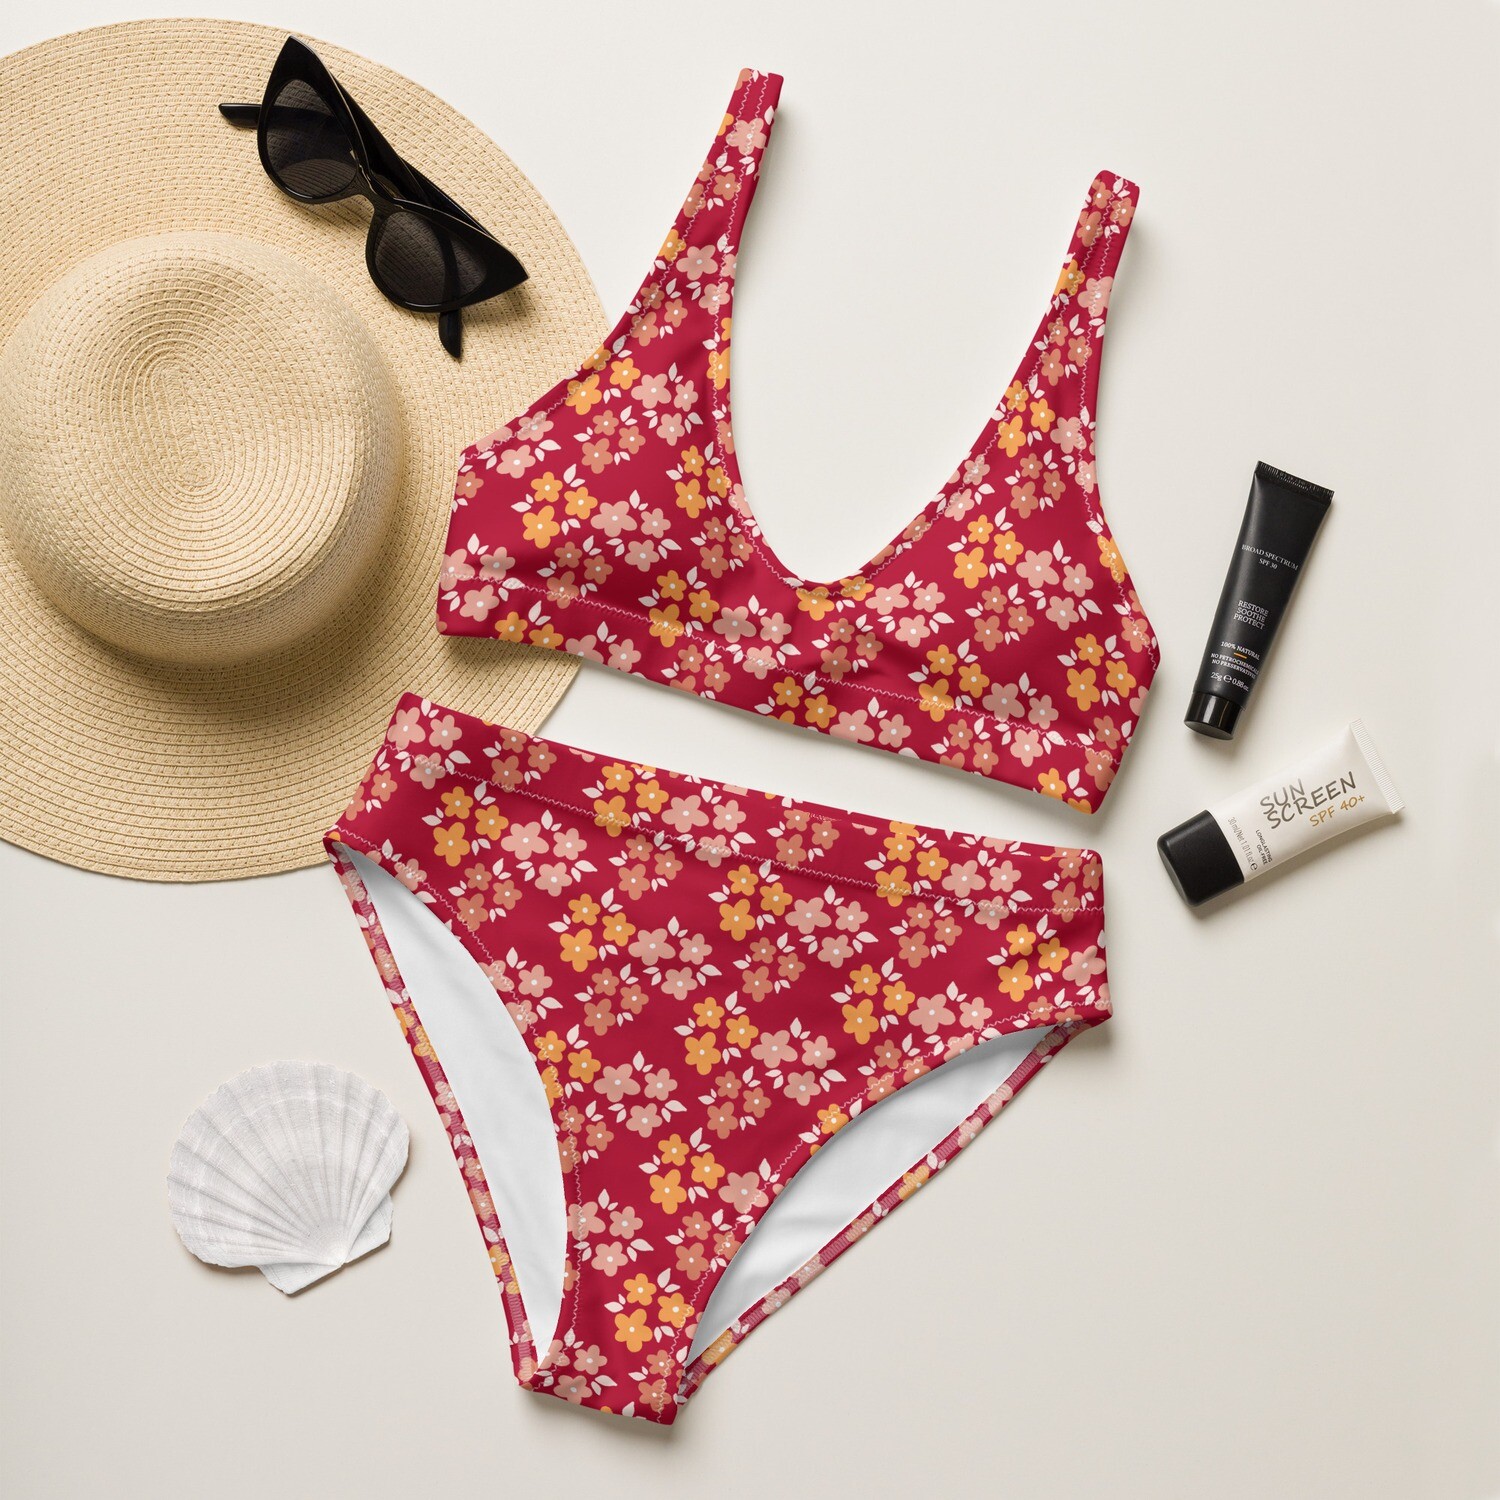 Hibiscus red recycled high-waisted bikini set with retro floral pattern in sizes XS-3XL